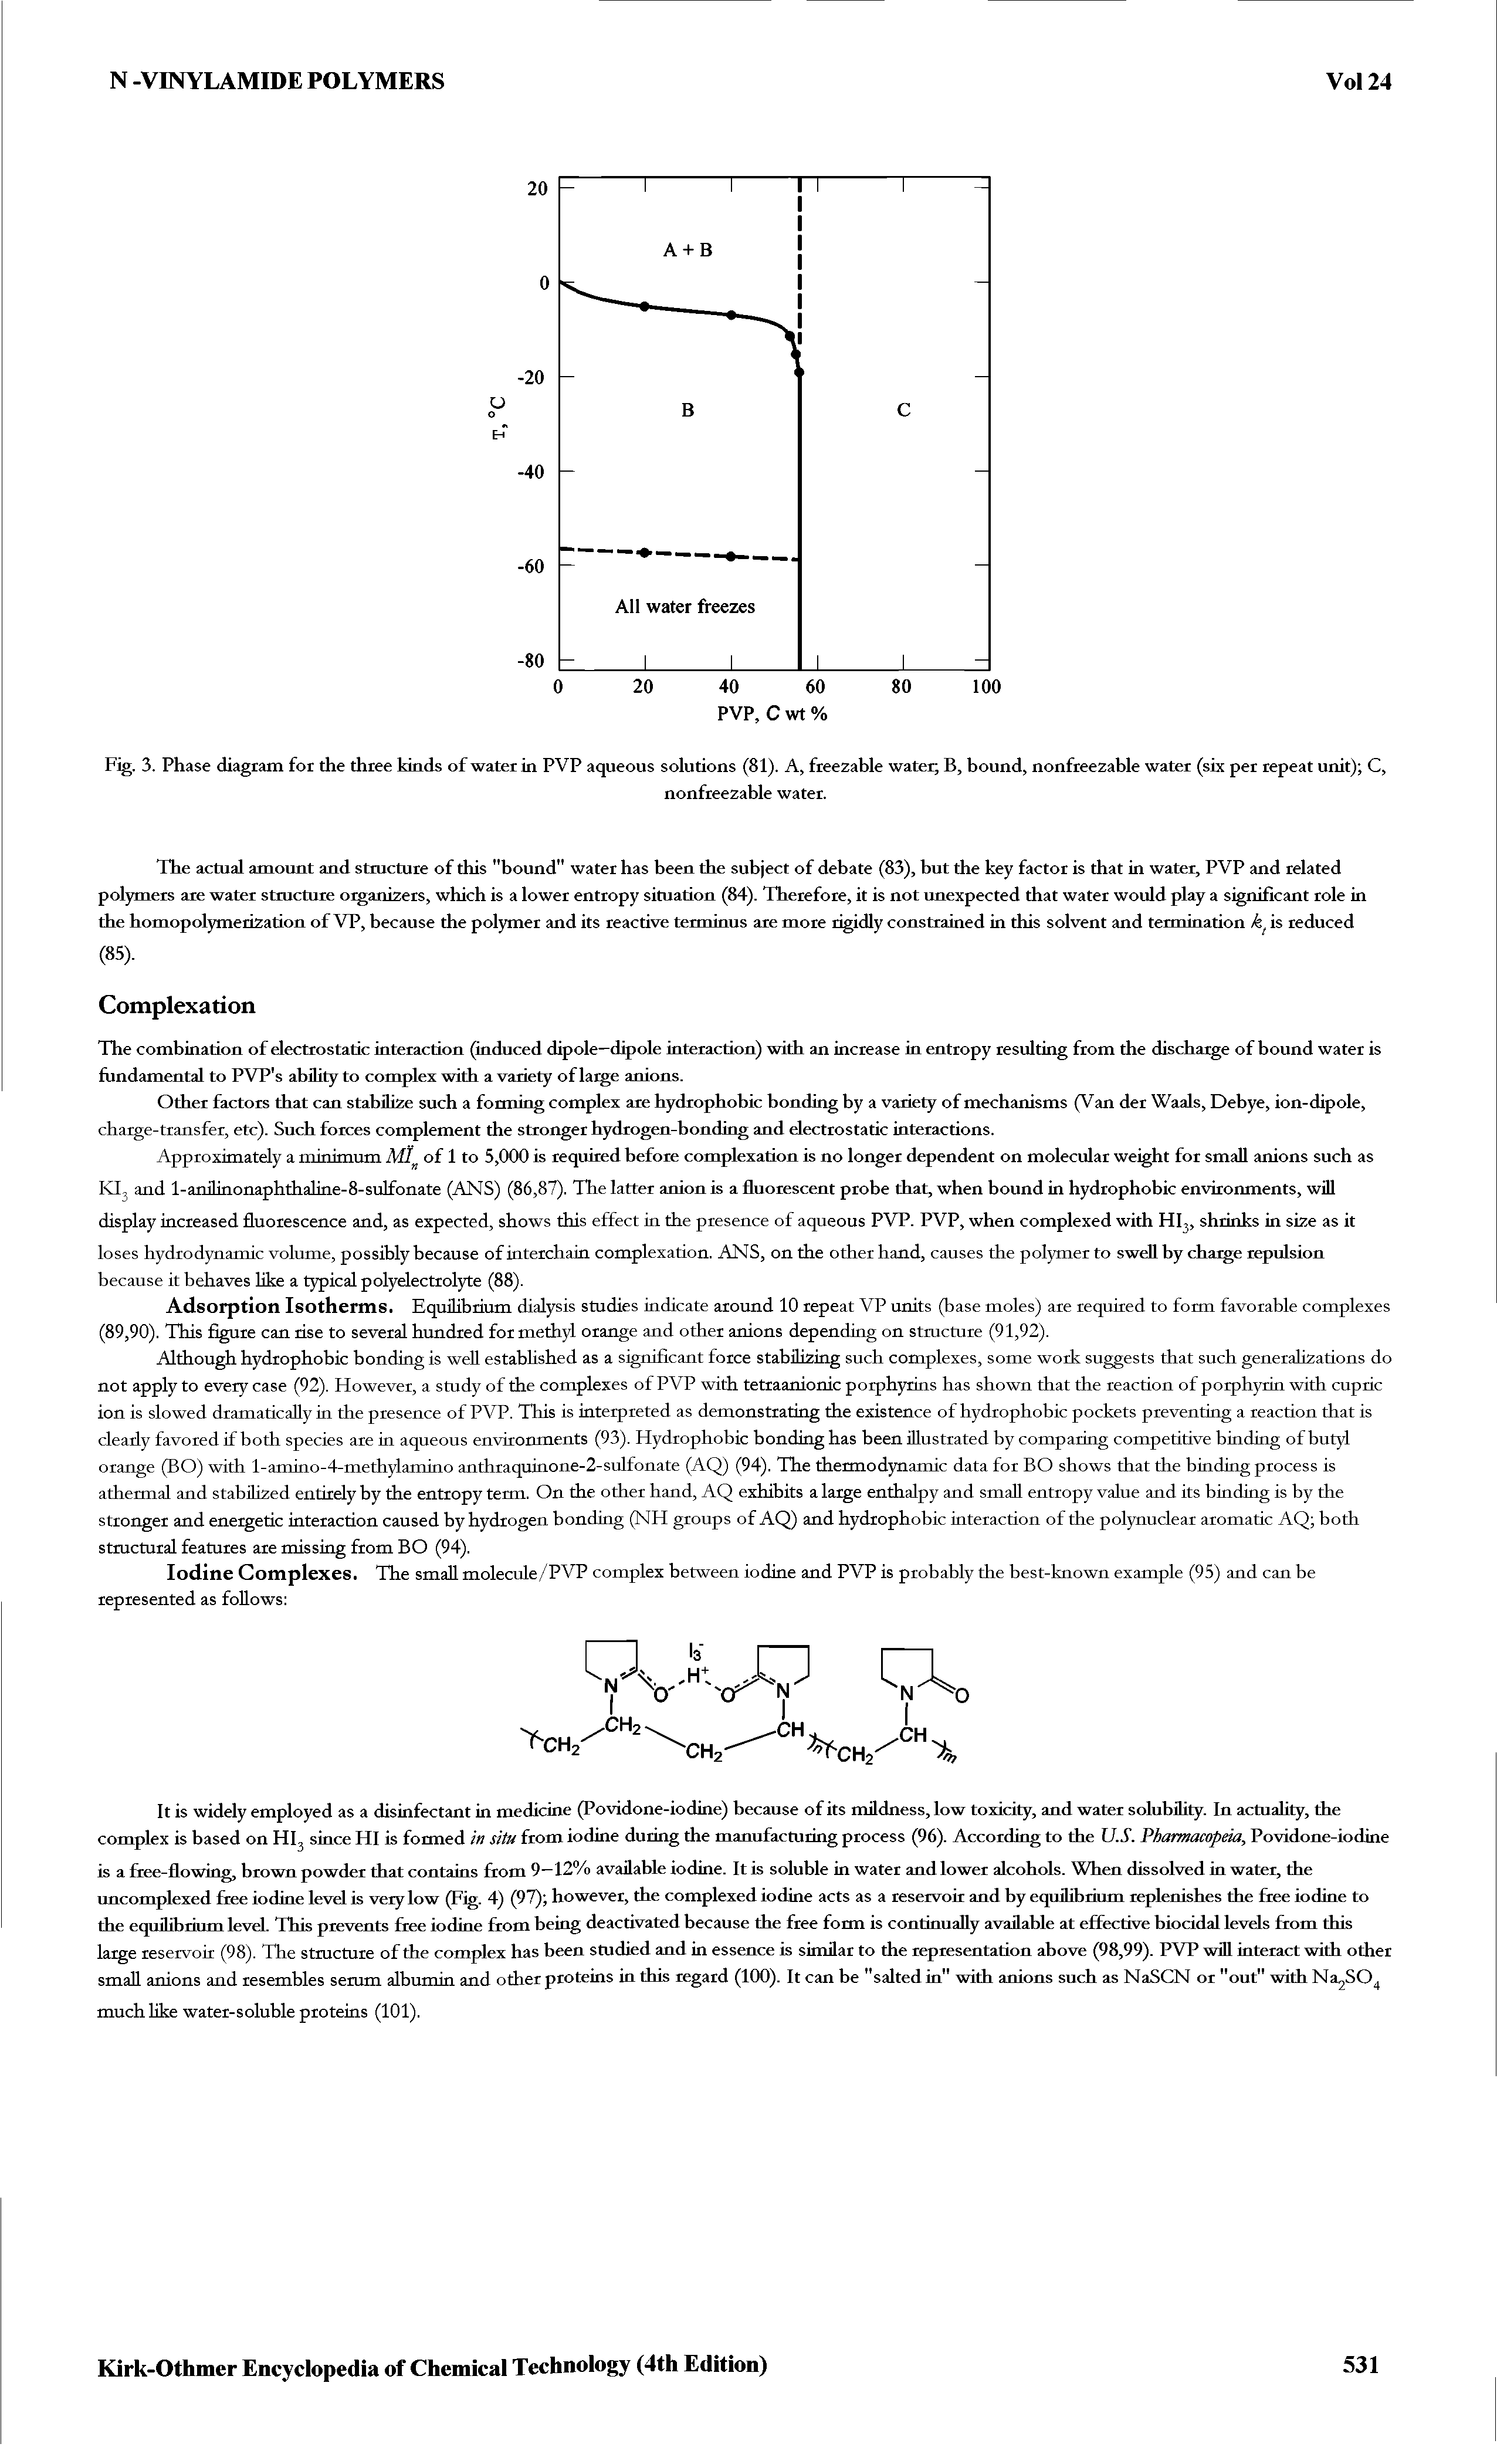 Fig. 3. Phase diagram for the three kinds of water in PVP aqueous solutions (81). A, freezable water B, bound, nonfreezable water (six per repeat unit) C,...